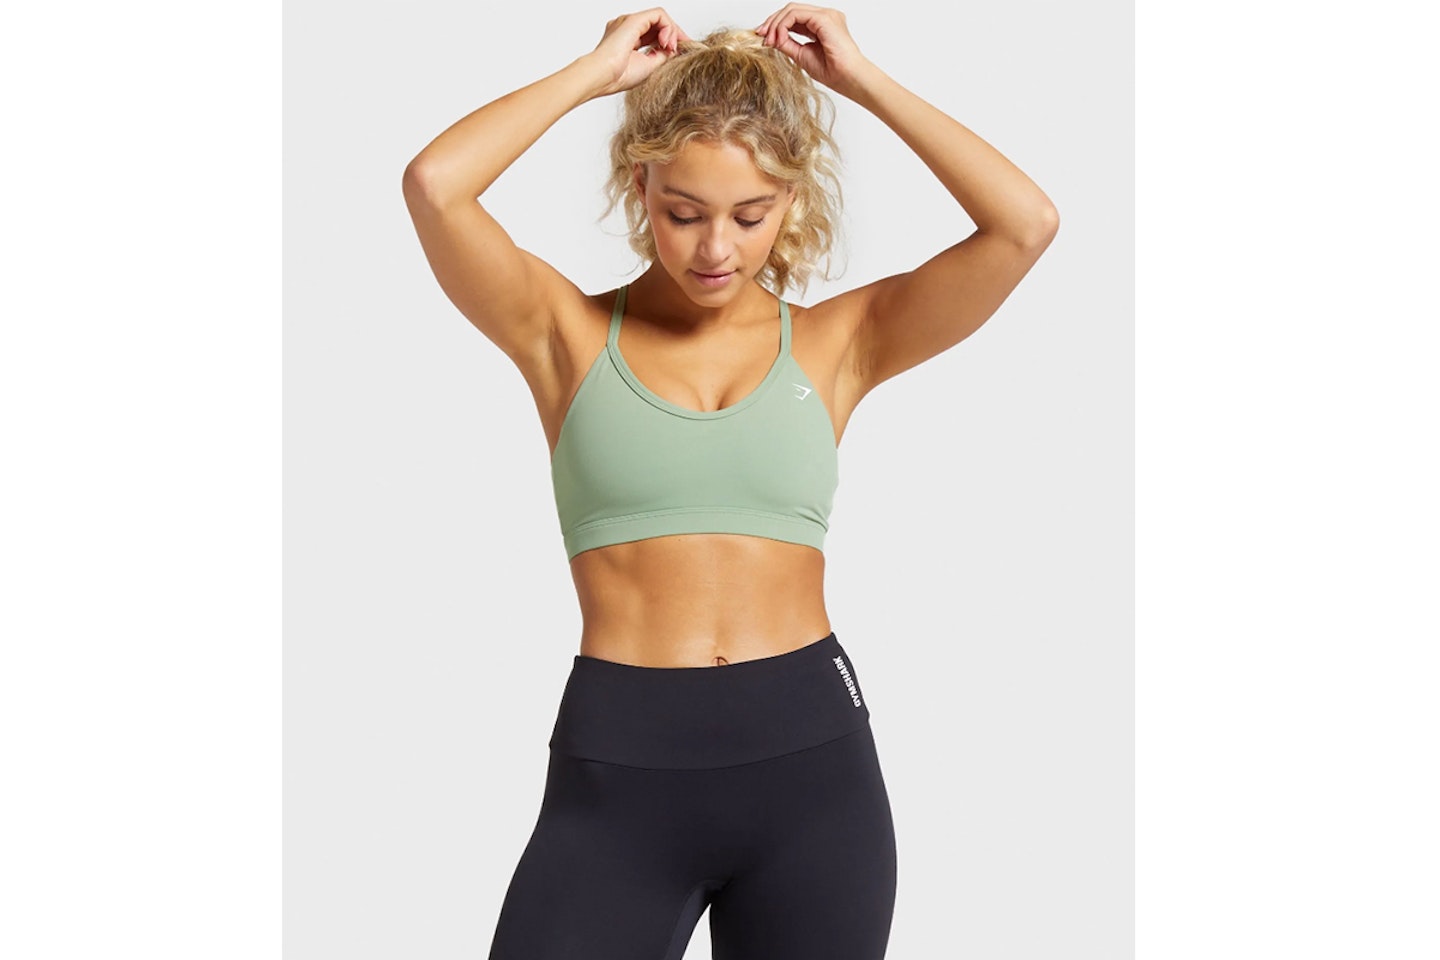 Gymshark's new sports bra collection is their most innovative yet